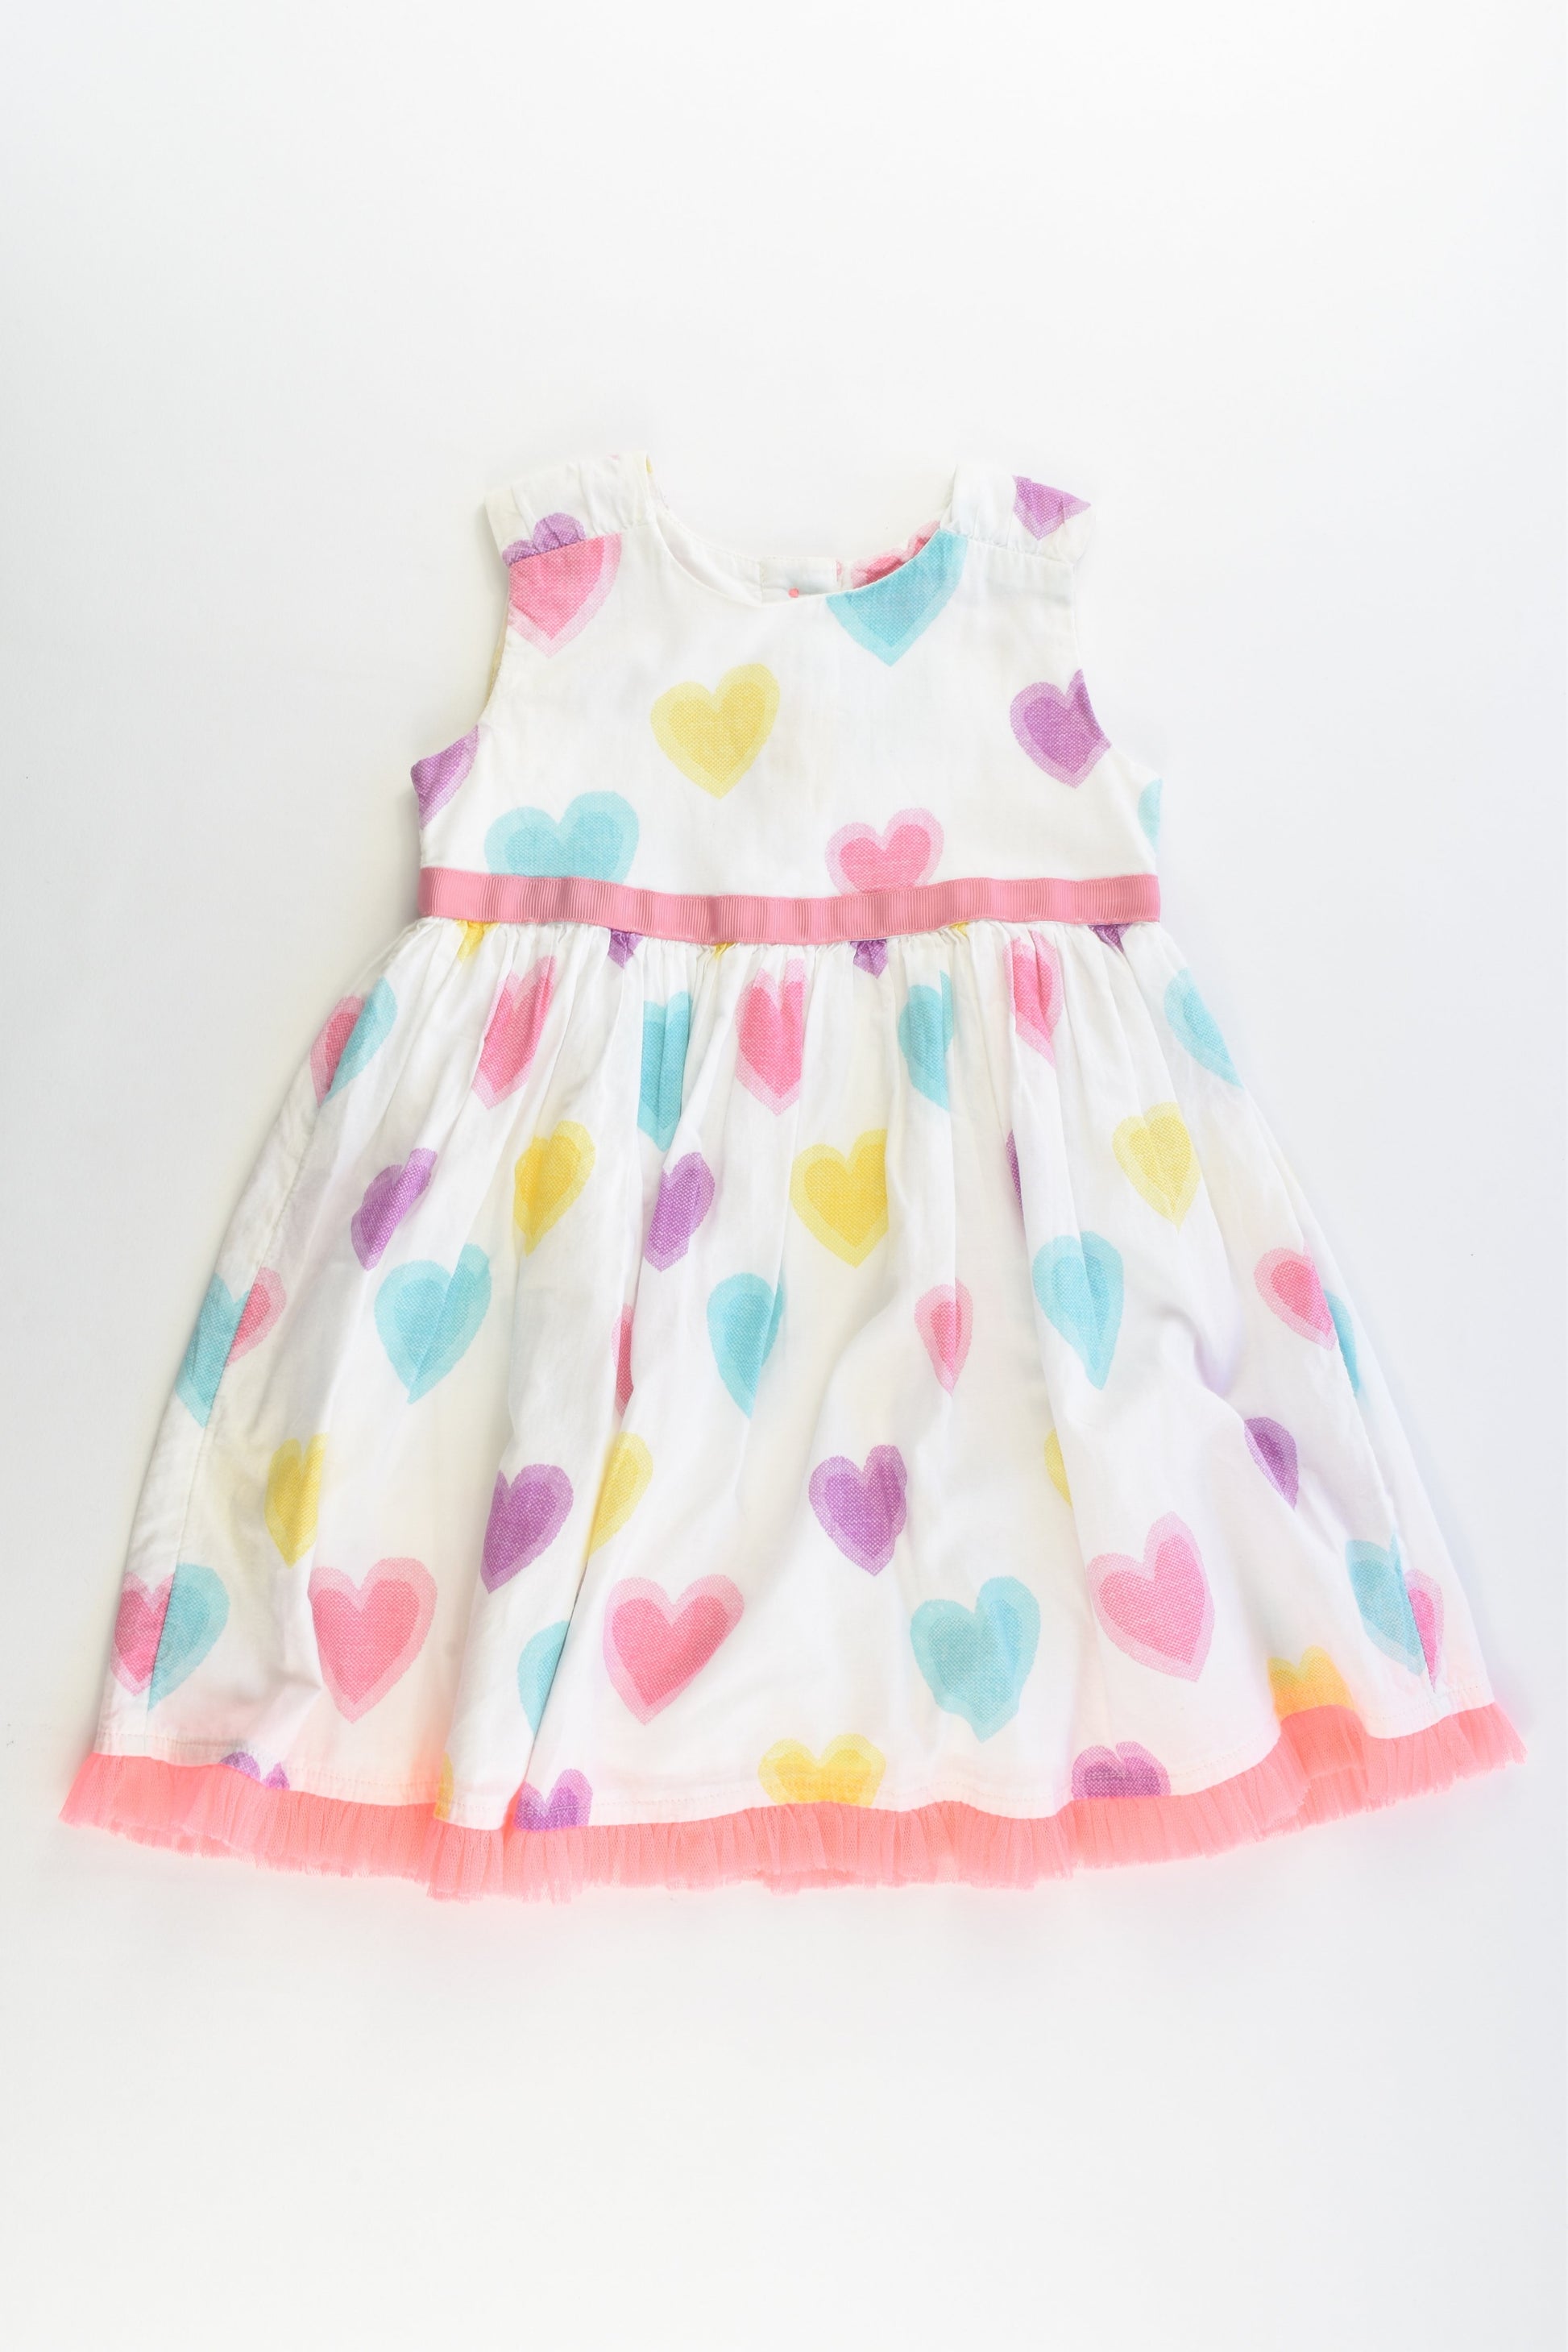 M&S Size 0 (9-12 months, 76 cm) Lined Love Hearts Dress